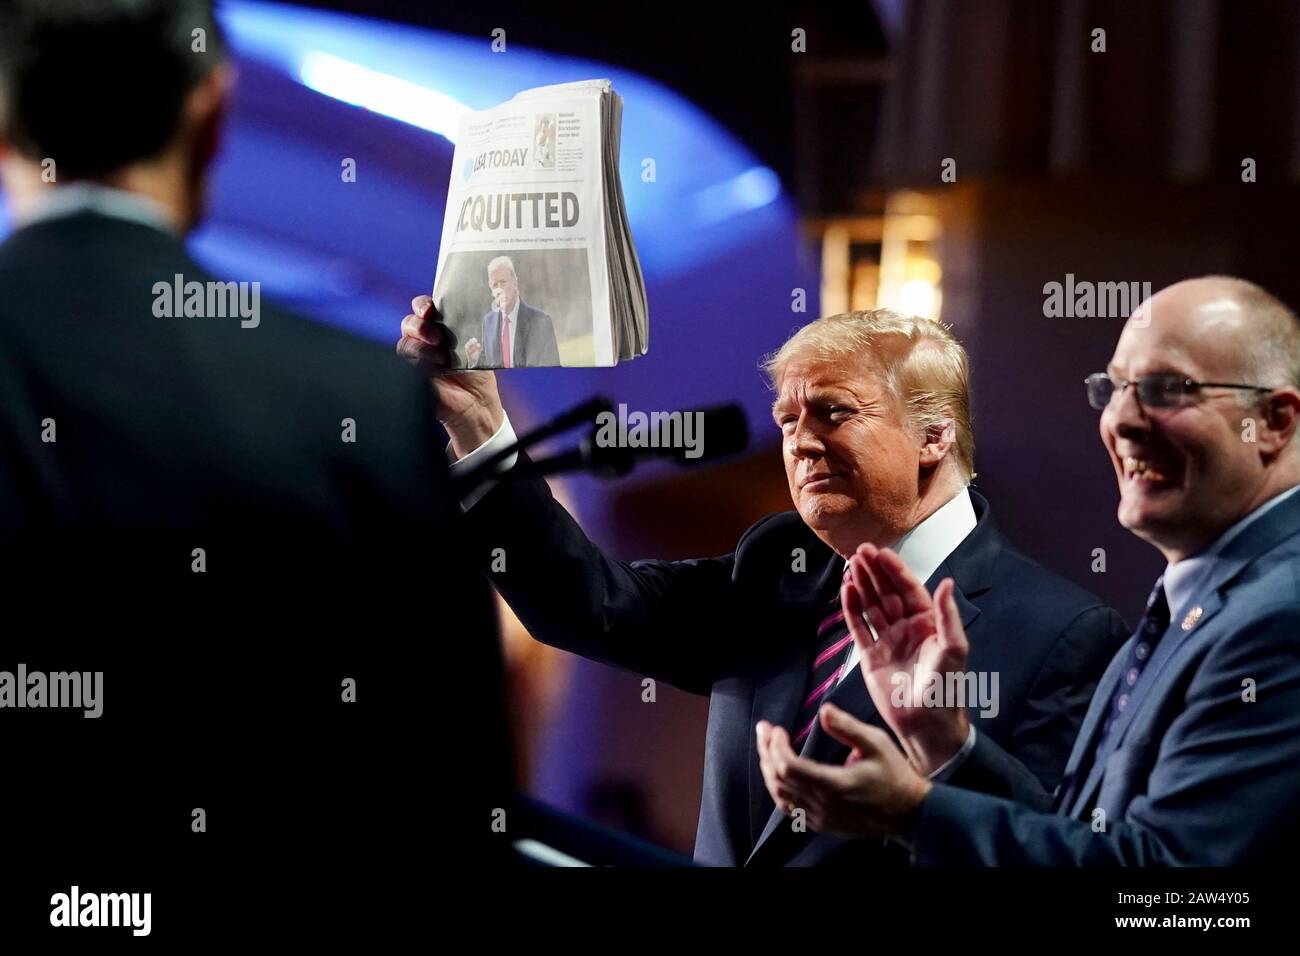 Washington, United States Of America. 06th Feb, 2020. Washington, United States of America. 06 February, 2020. U.S President Donald Trump holds up a copy of the Washington Post during remarks at the 2020 National Prayer Breakfast at the Washington Hilton February 6, 2020 in Washington, DC Trump used the normally bipartisan event to savage his opponents calling them vicious and mean following his Senate acquittal in the impeachment trial. Credit: D. Myles Cullen/White House Photo/Alamy Live News Stock Photo